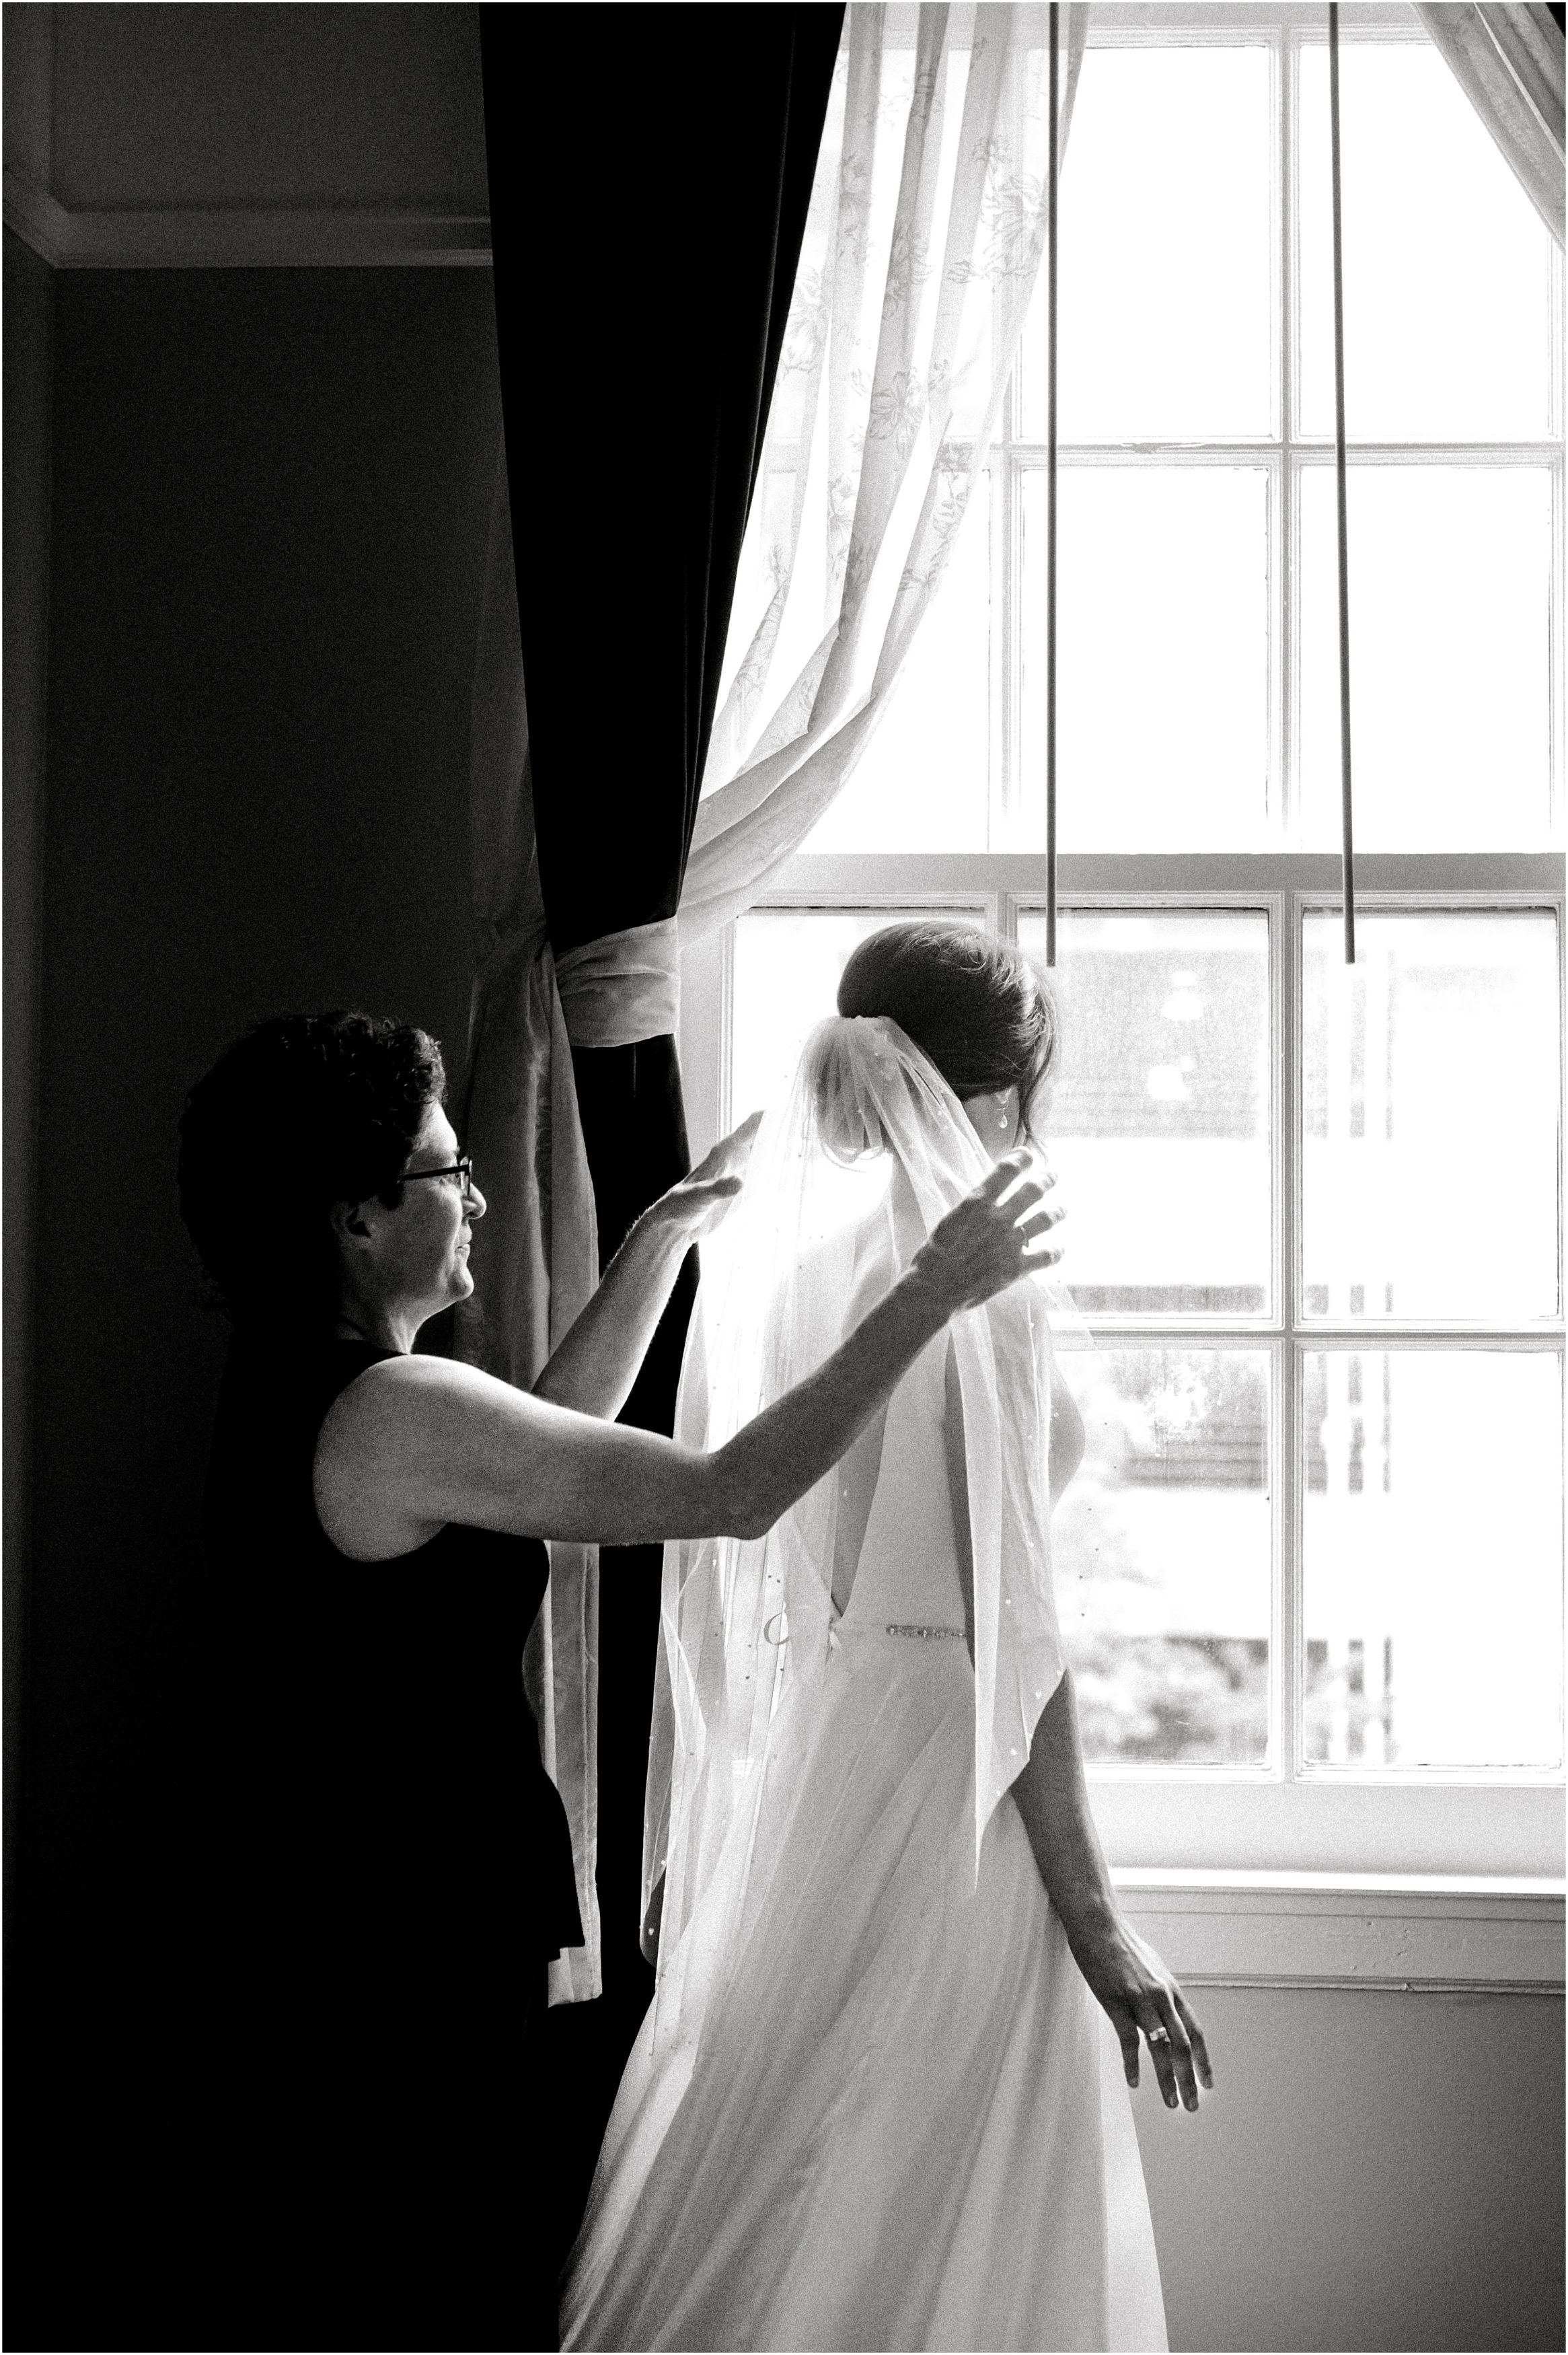 Bride's mother adjusts her veil in front of a window at the Omaha Wedding Venue, Magnolia Hotel. Photo by Omaha NE wedding Photographer, Anna Brace.
